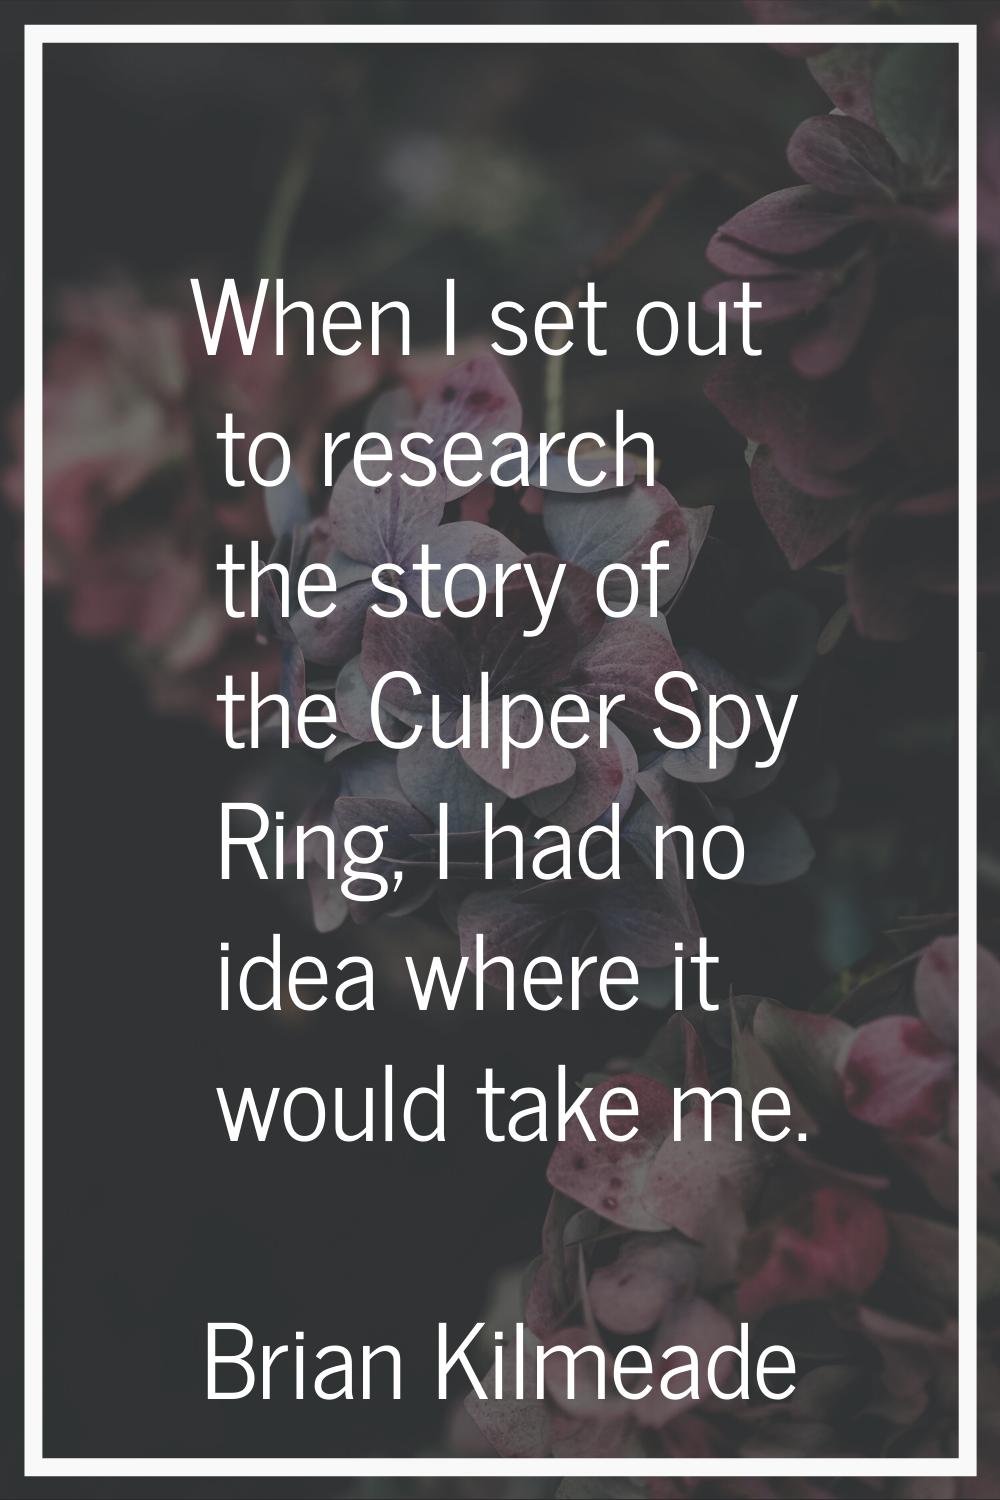 When I set out to research the story of the Culper Spy Ring, I had no idea where it would take me.